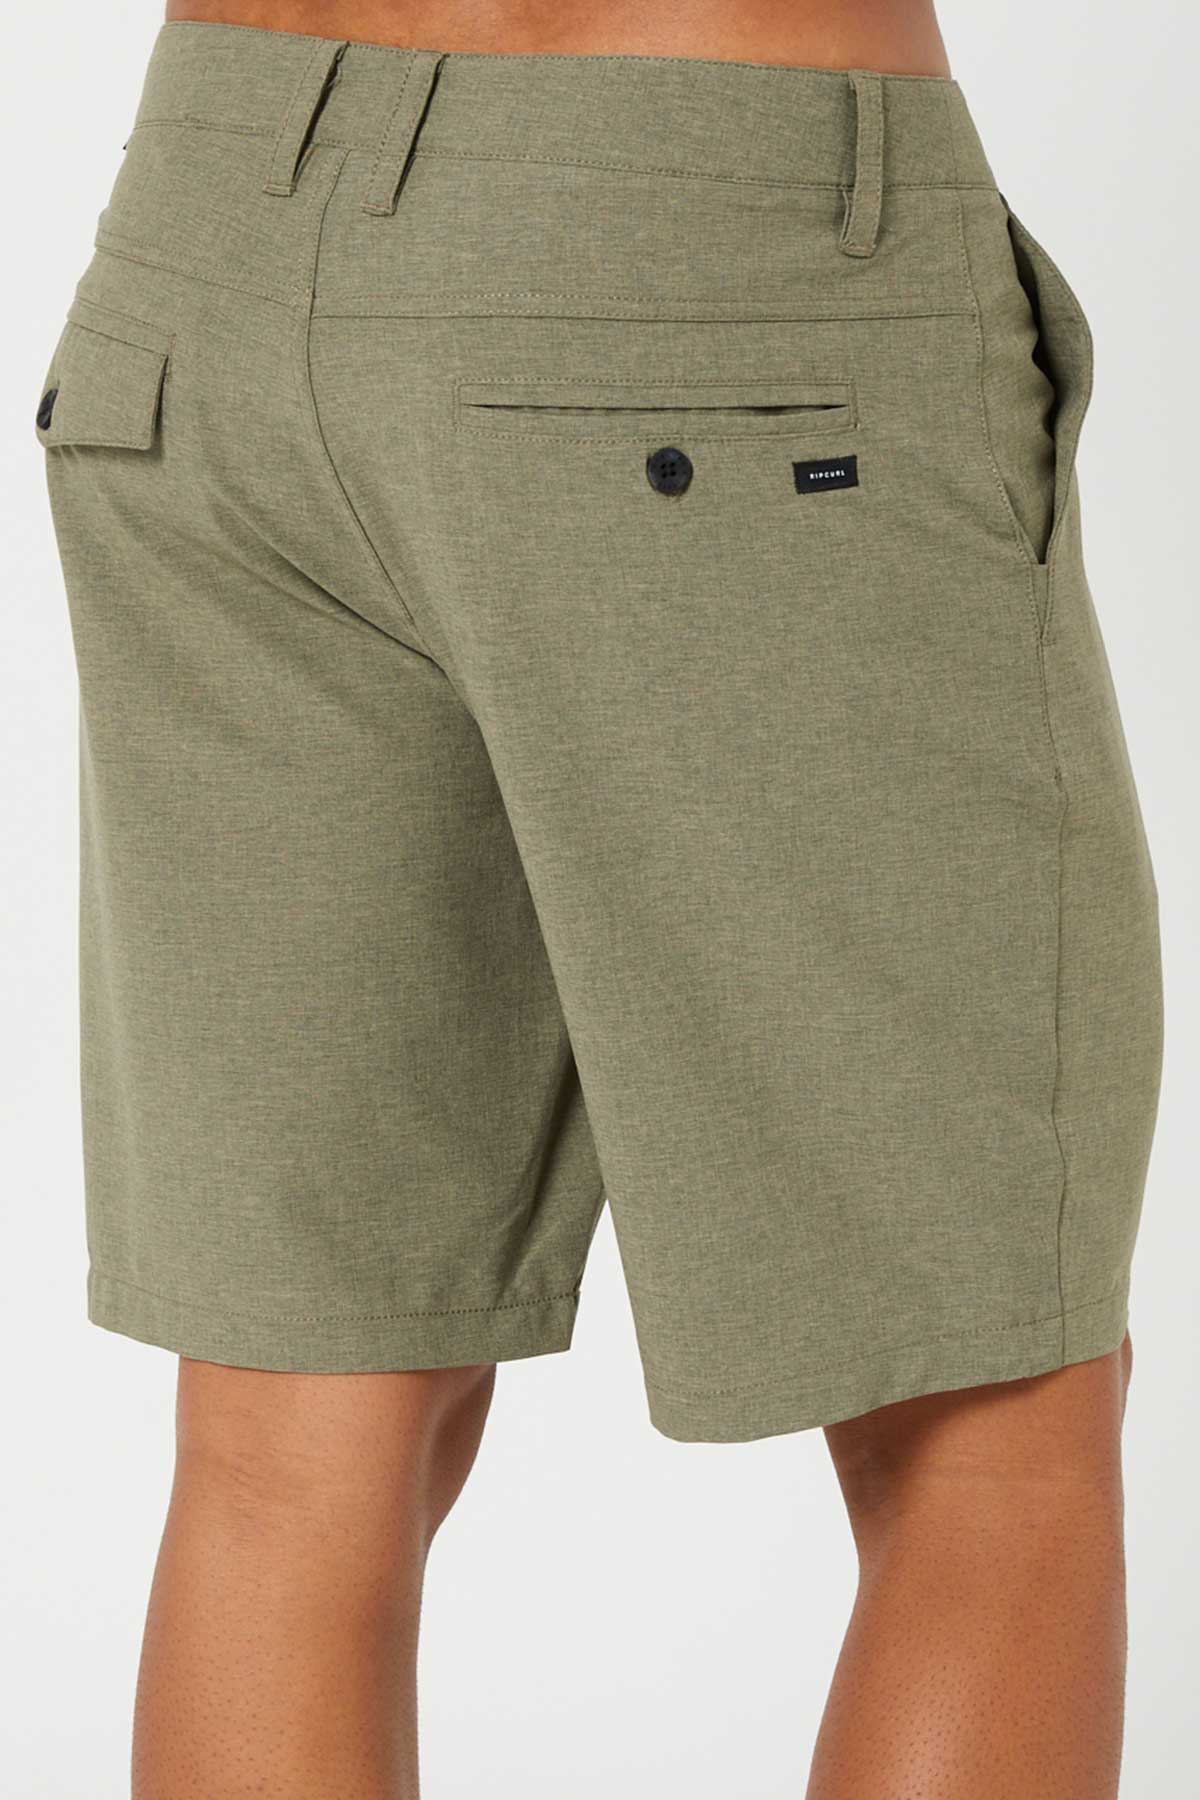 Rip Curl Mens Shorts Boardwalk Epic Mix in Washed Moss back